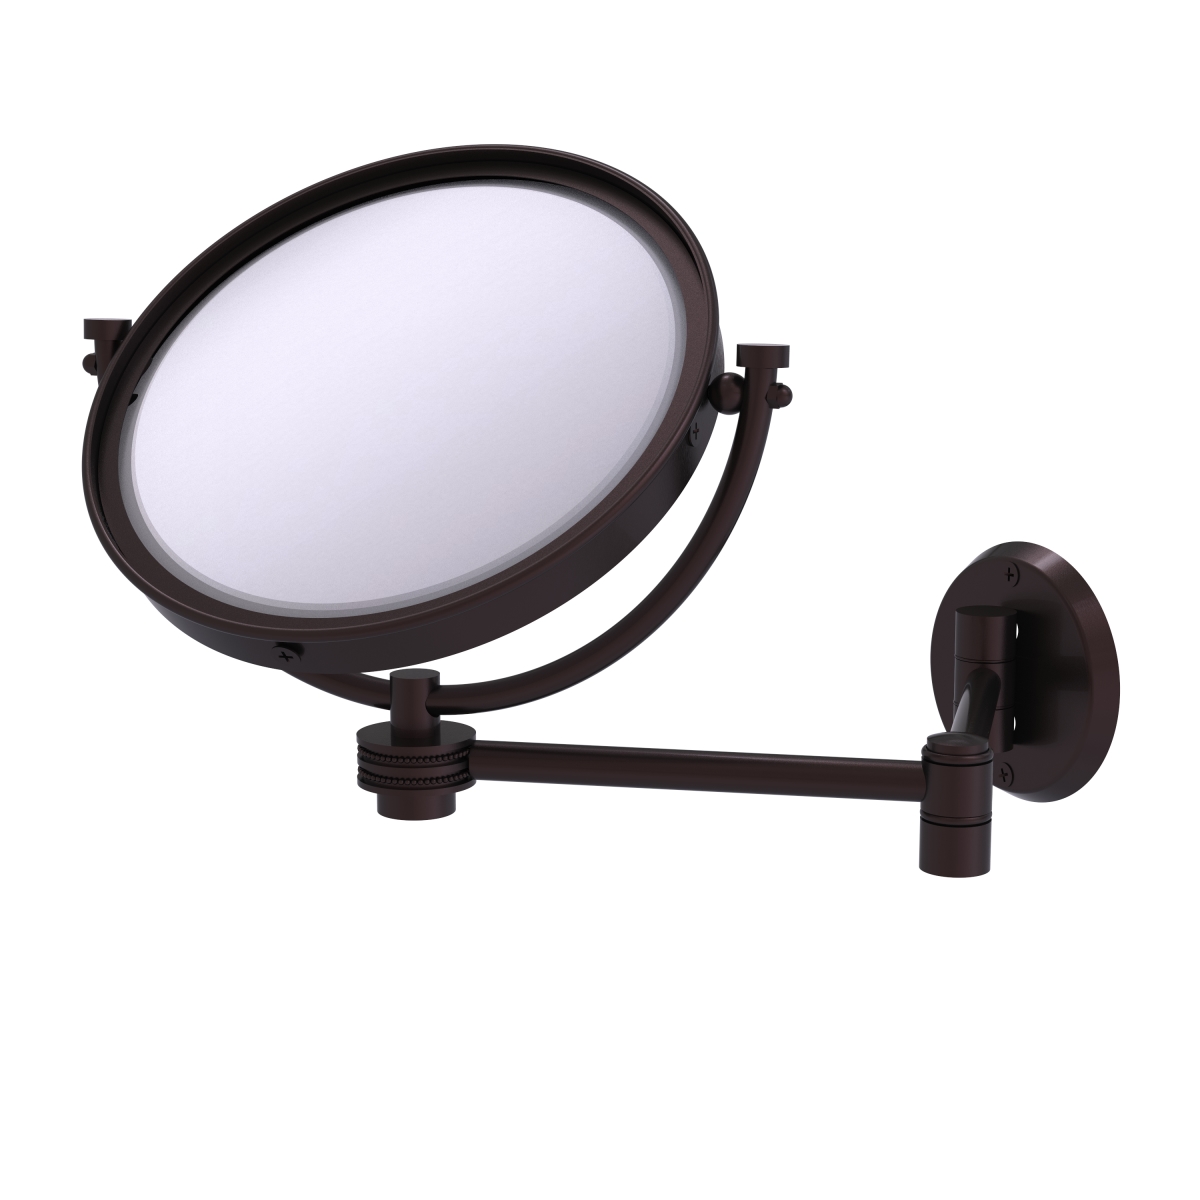 Allied Brass WM-6D-4X-ABZ 8 in. Wall Mounted Extending Make-Up Mirror 4X Magnification with Dotted Accent, Antique Bronze